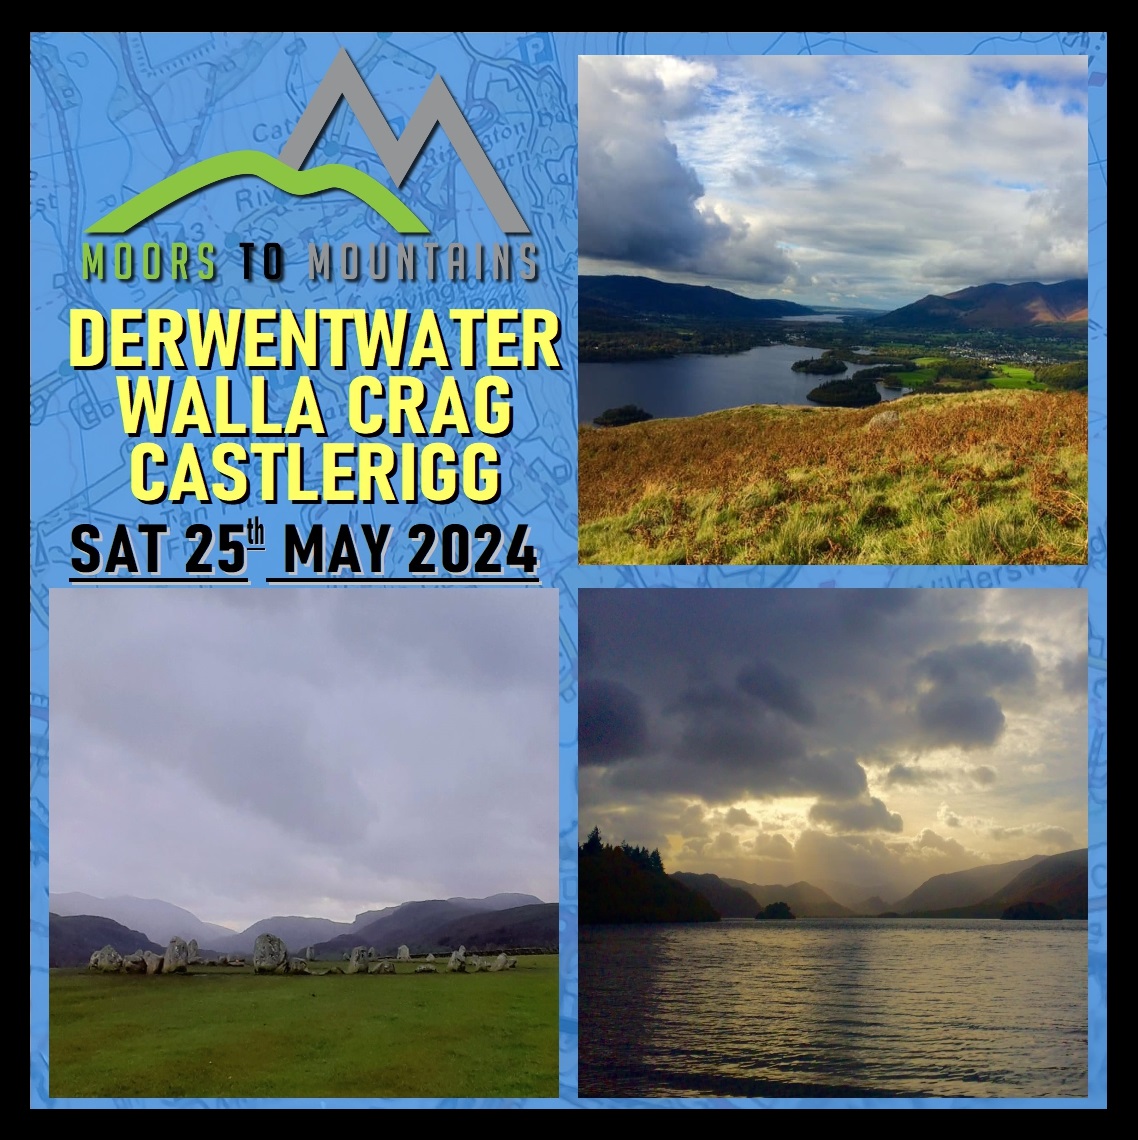 The first installment of my Lake District weekender will be astraight forward walk for those who might like a taster of what to expect up in the Lakes. #walking #hiking #guidedwalks #walkguide #walkleader #mountainleader #derwentwater #wallacrag #castleriggstonecircle